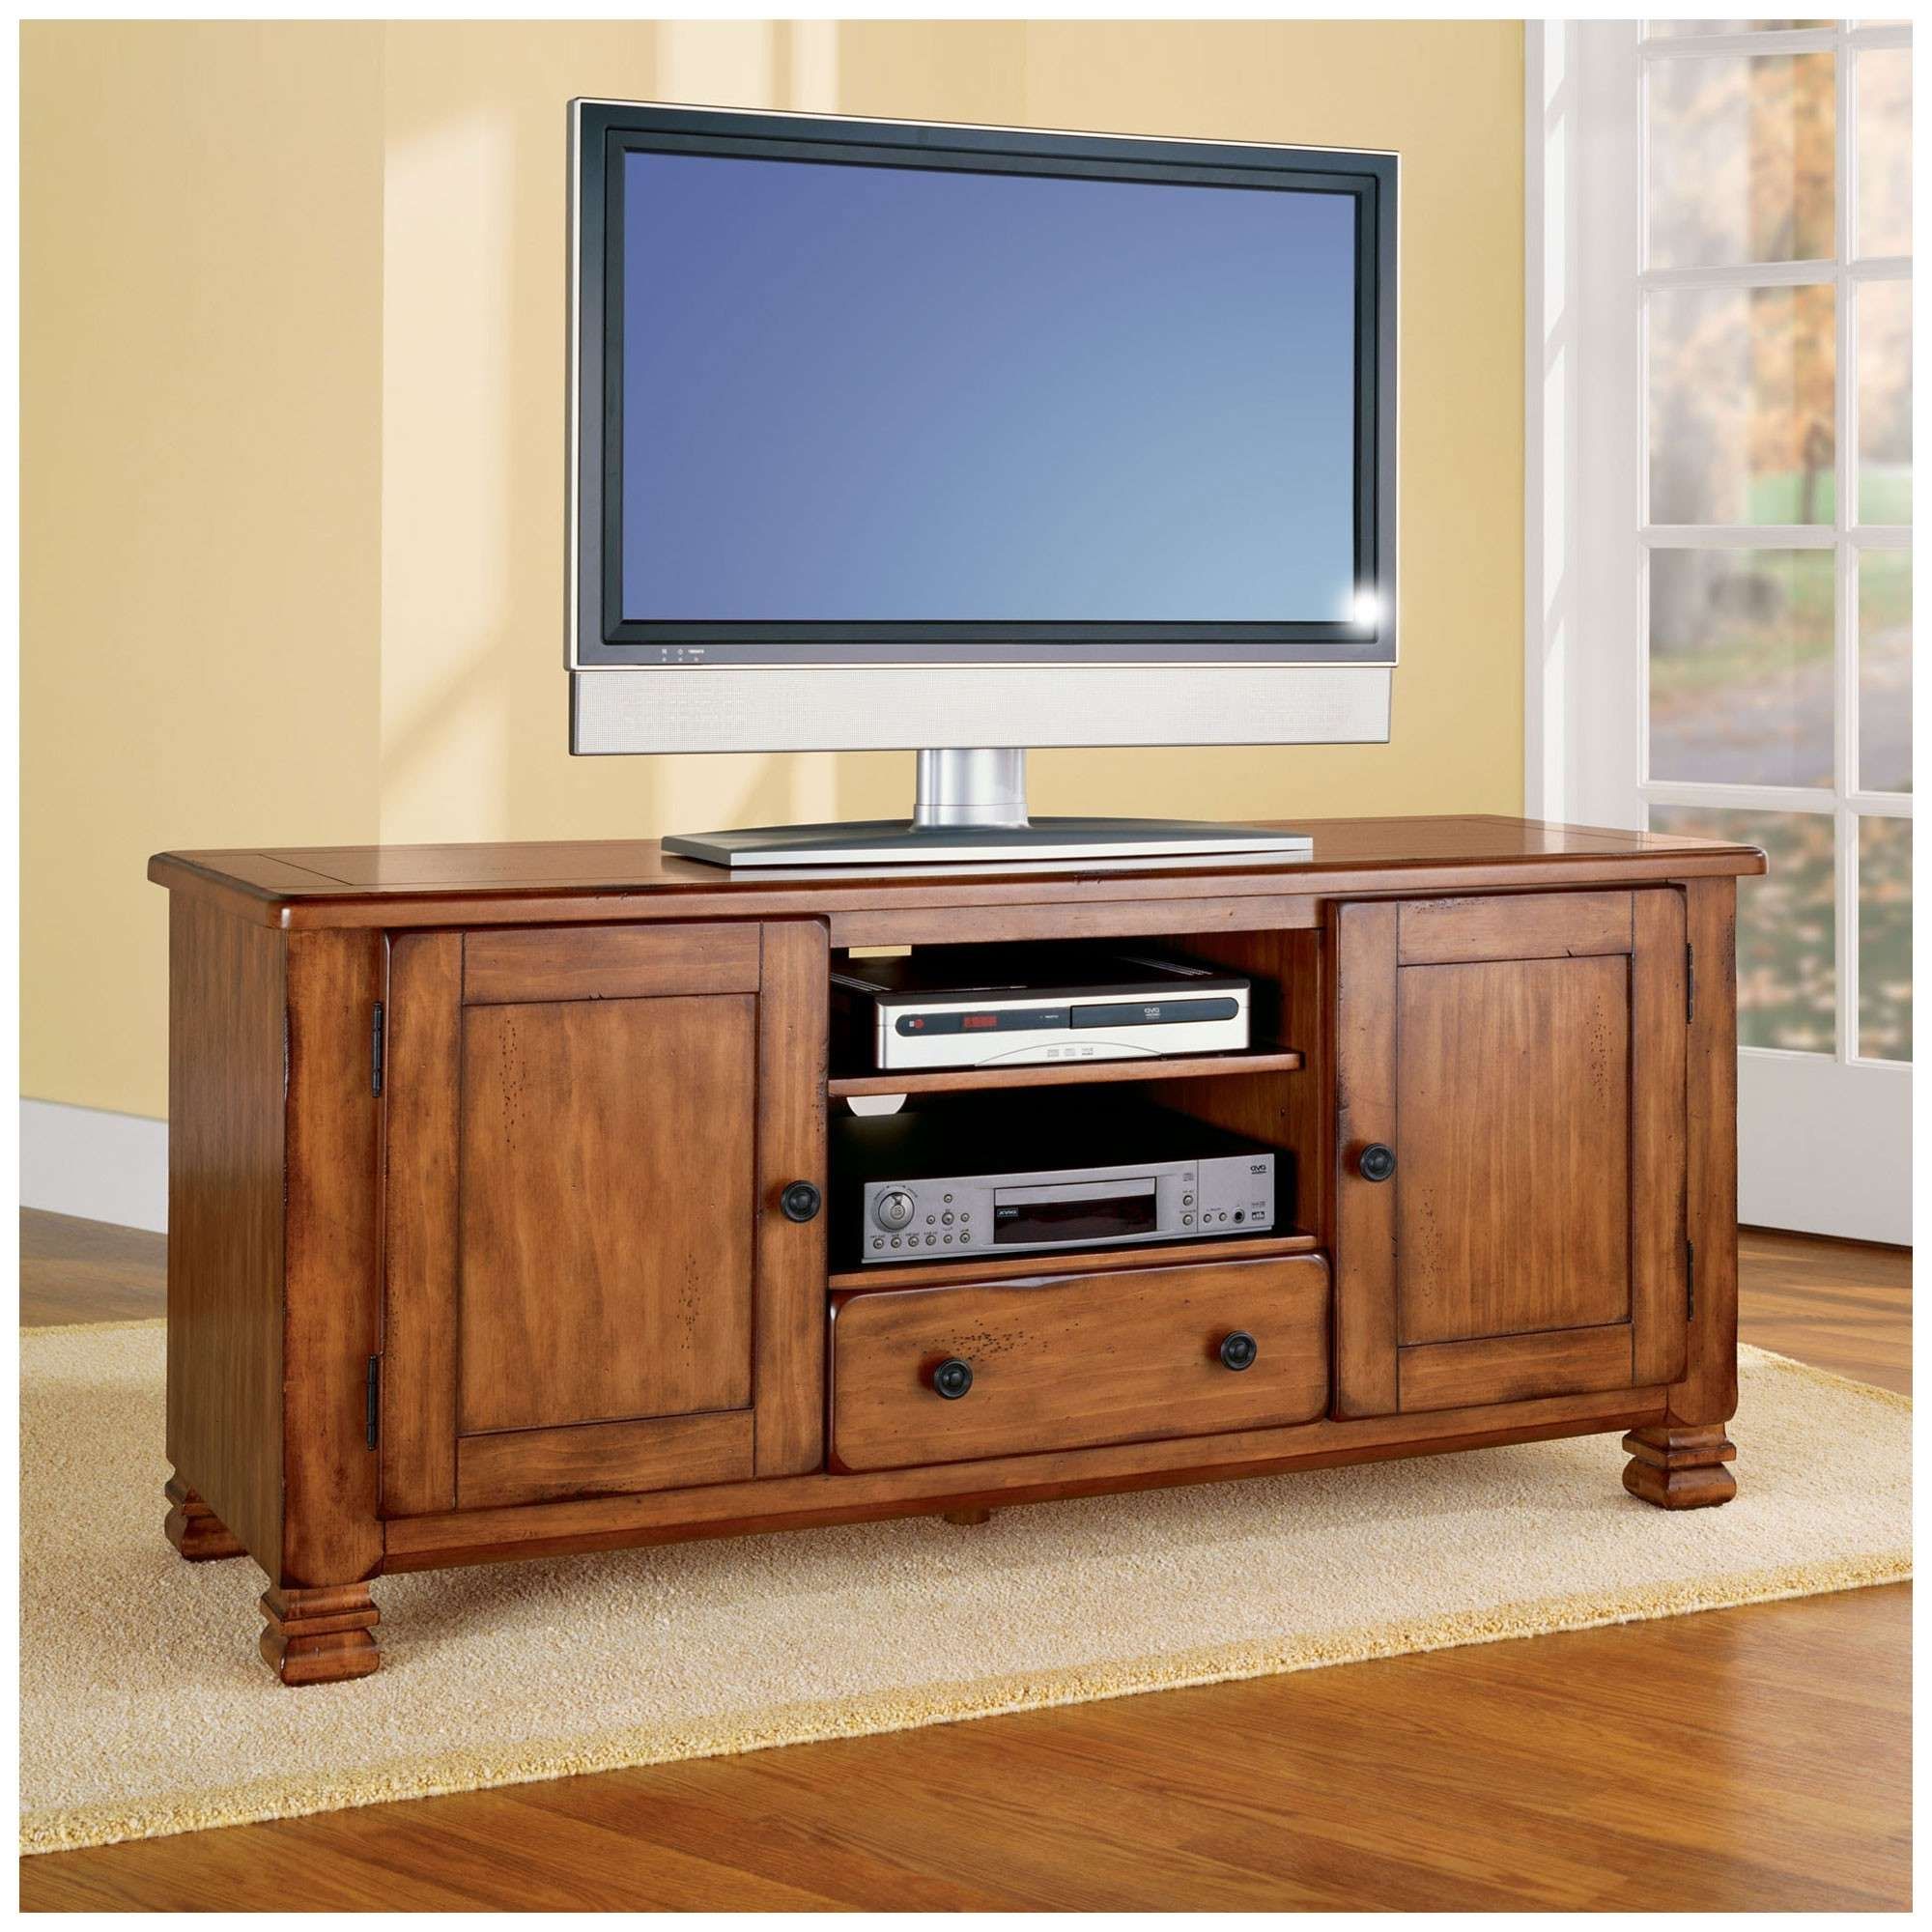 Fresh Cheap Cherry Wood Tv Stands Cabinets #17103 With Regard To Cheap Wood Tv Stands (View 2 of 15)